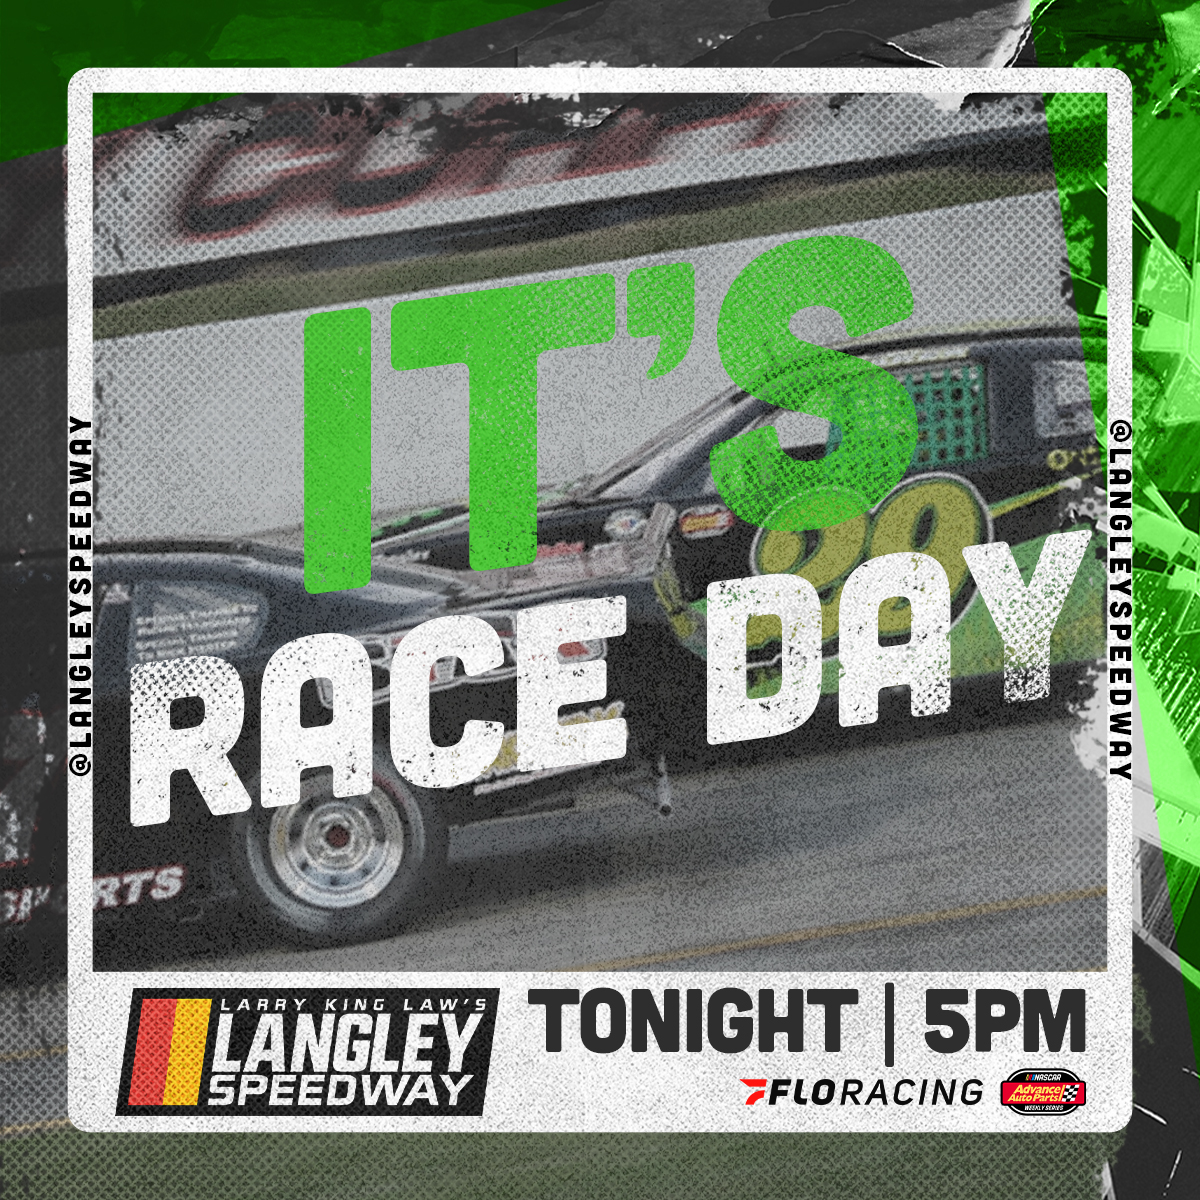 𝗚𝗲𝘁 𝘂𝗽! 𝗜𝘁'𝘀 @mosquitojoe 𝗥𝗔𝗖𝗘 𝗗𝗔𝗬! We're ready to roll tonight with 8️⃣ feature races! 🎟 bit.ly/langleytickets 📺 @FloRacing ℹ️ bit.ly/3W7RRgz